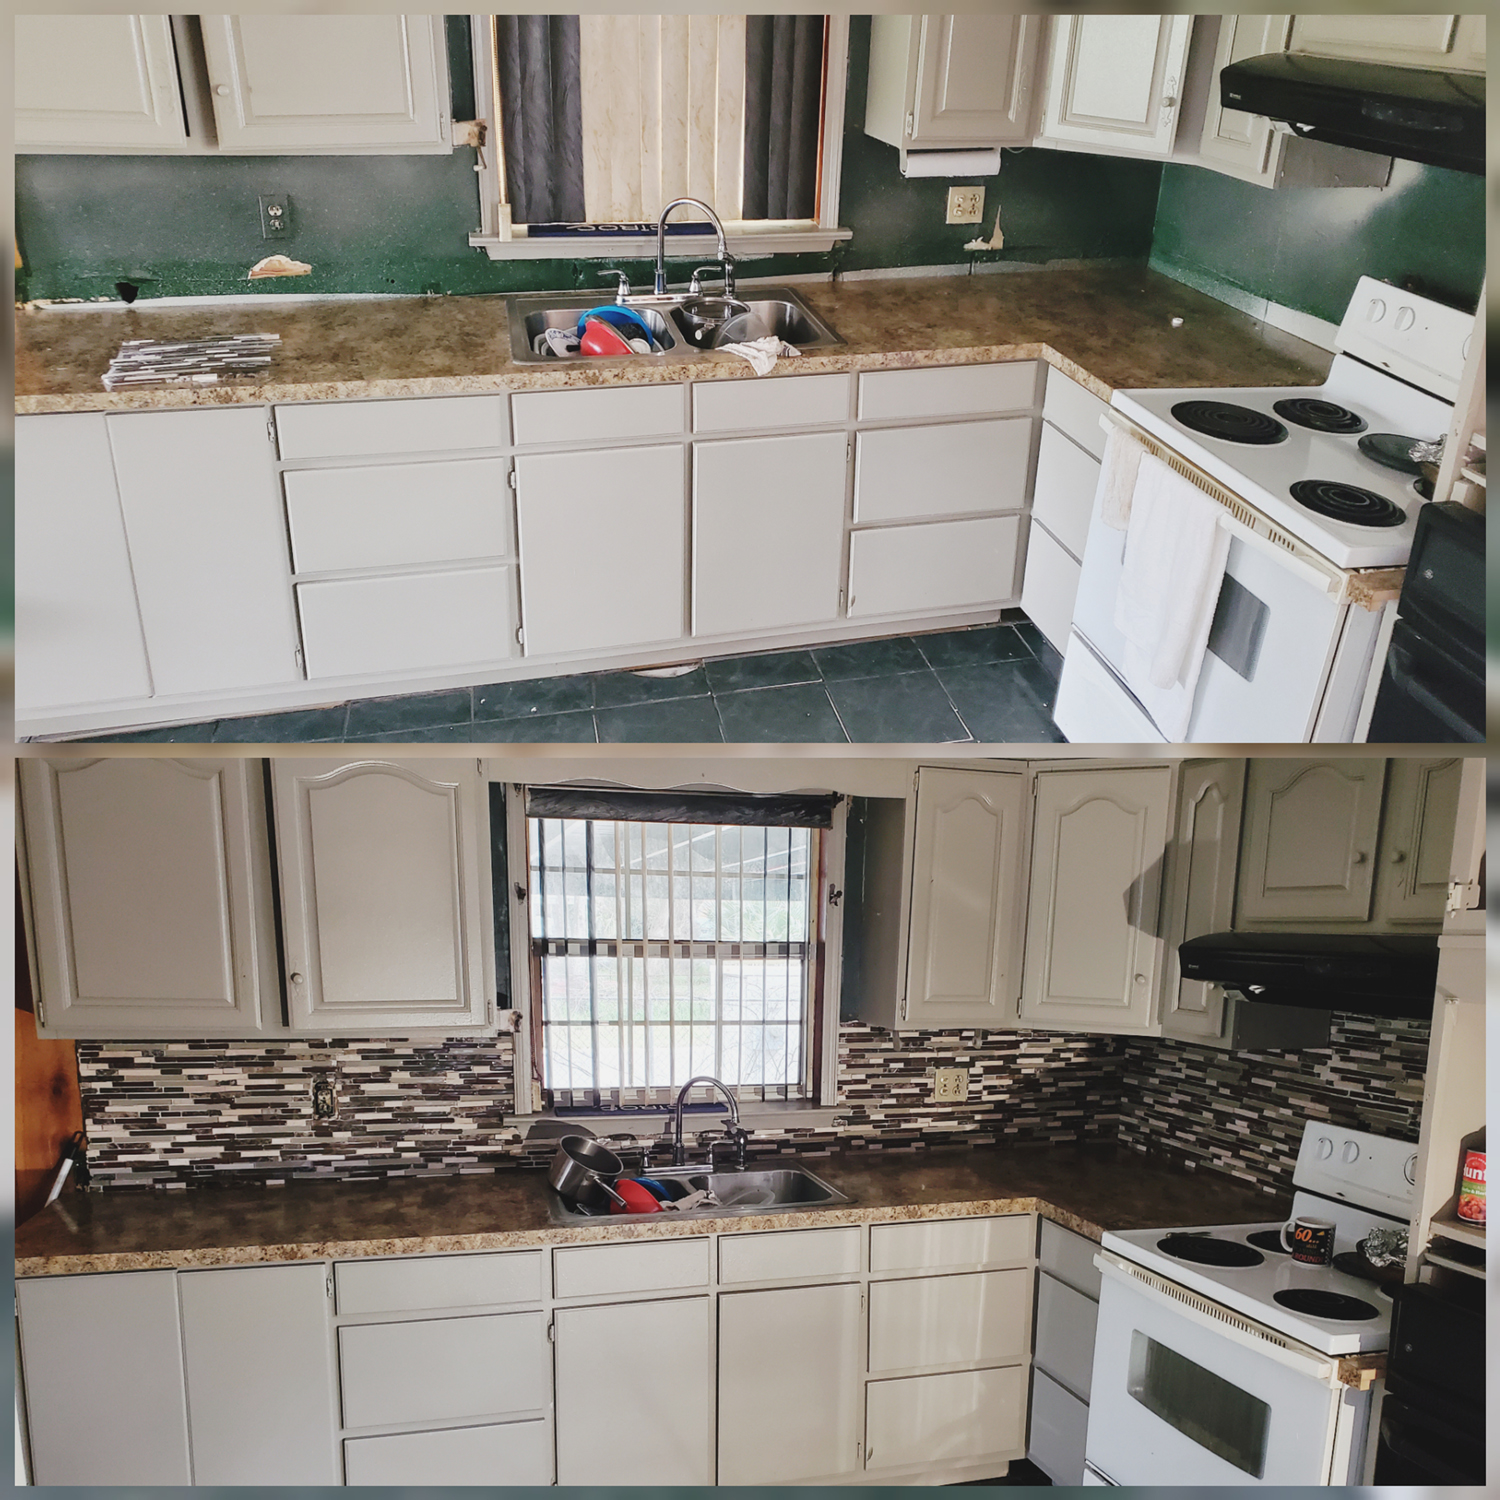 Kitchen Refinishing - Sparkle Cleaning Solutions & Refinishing